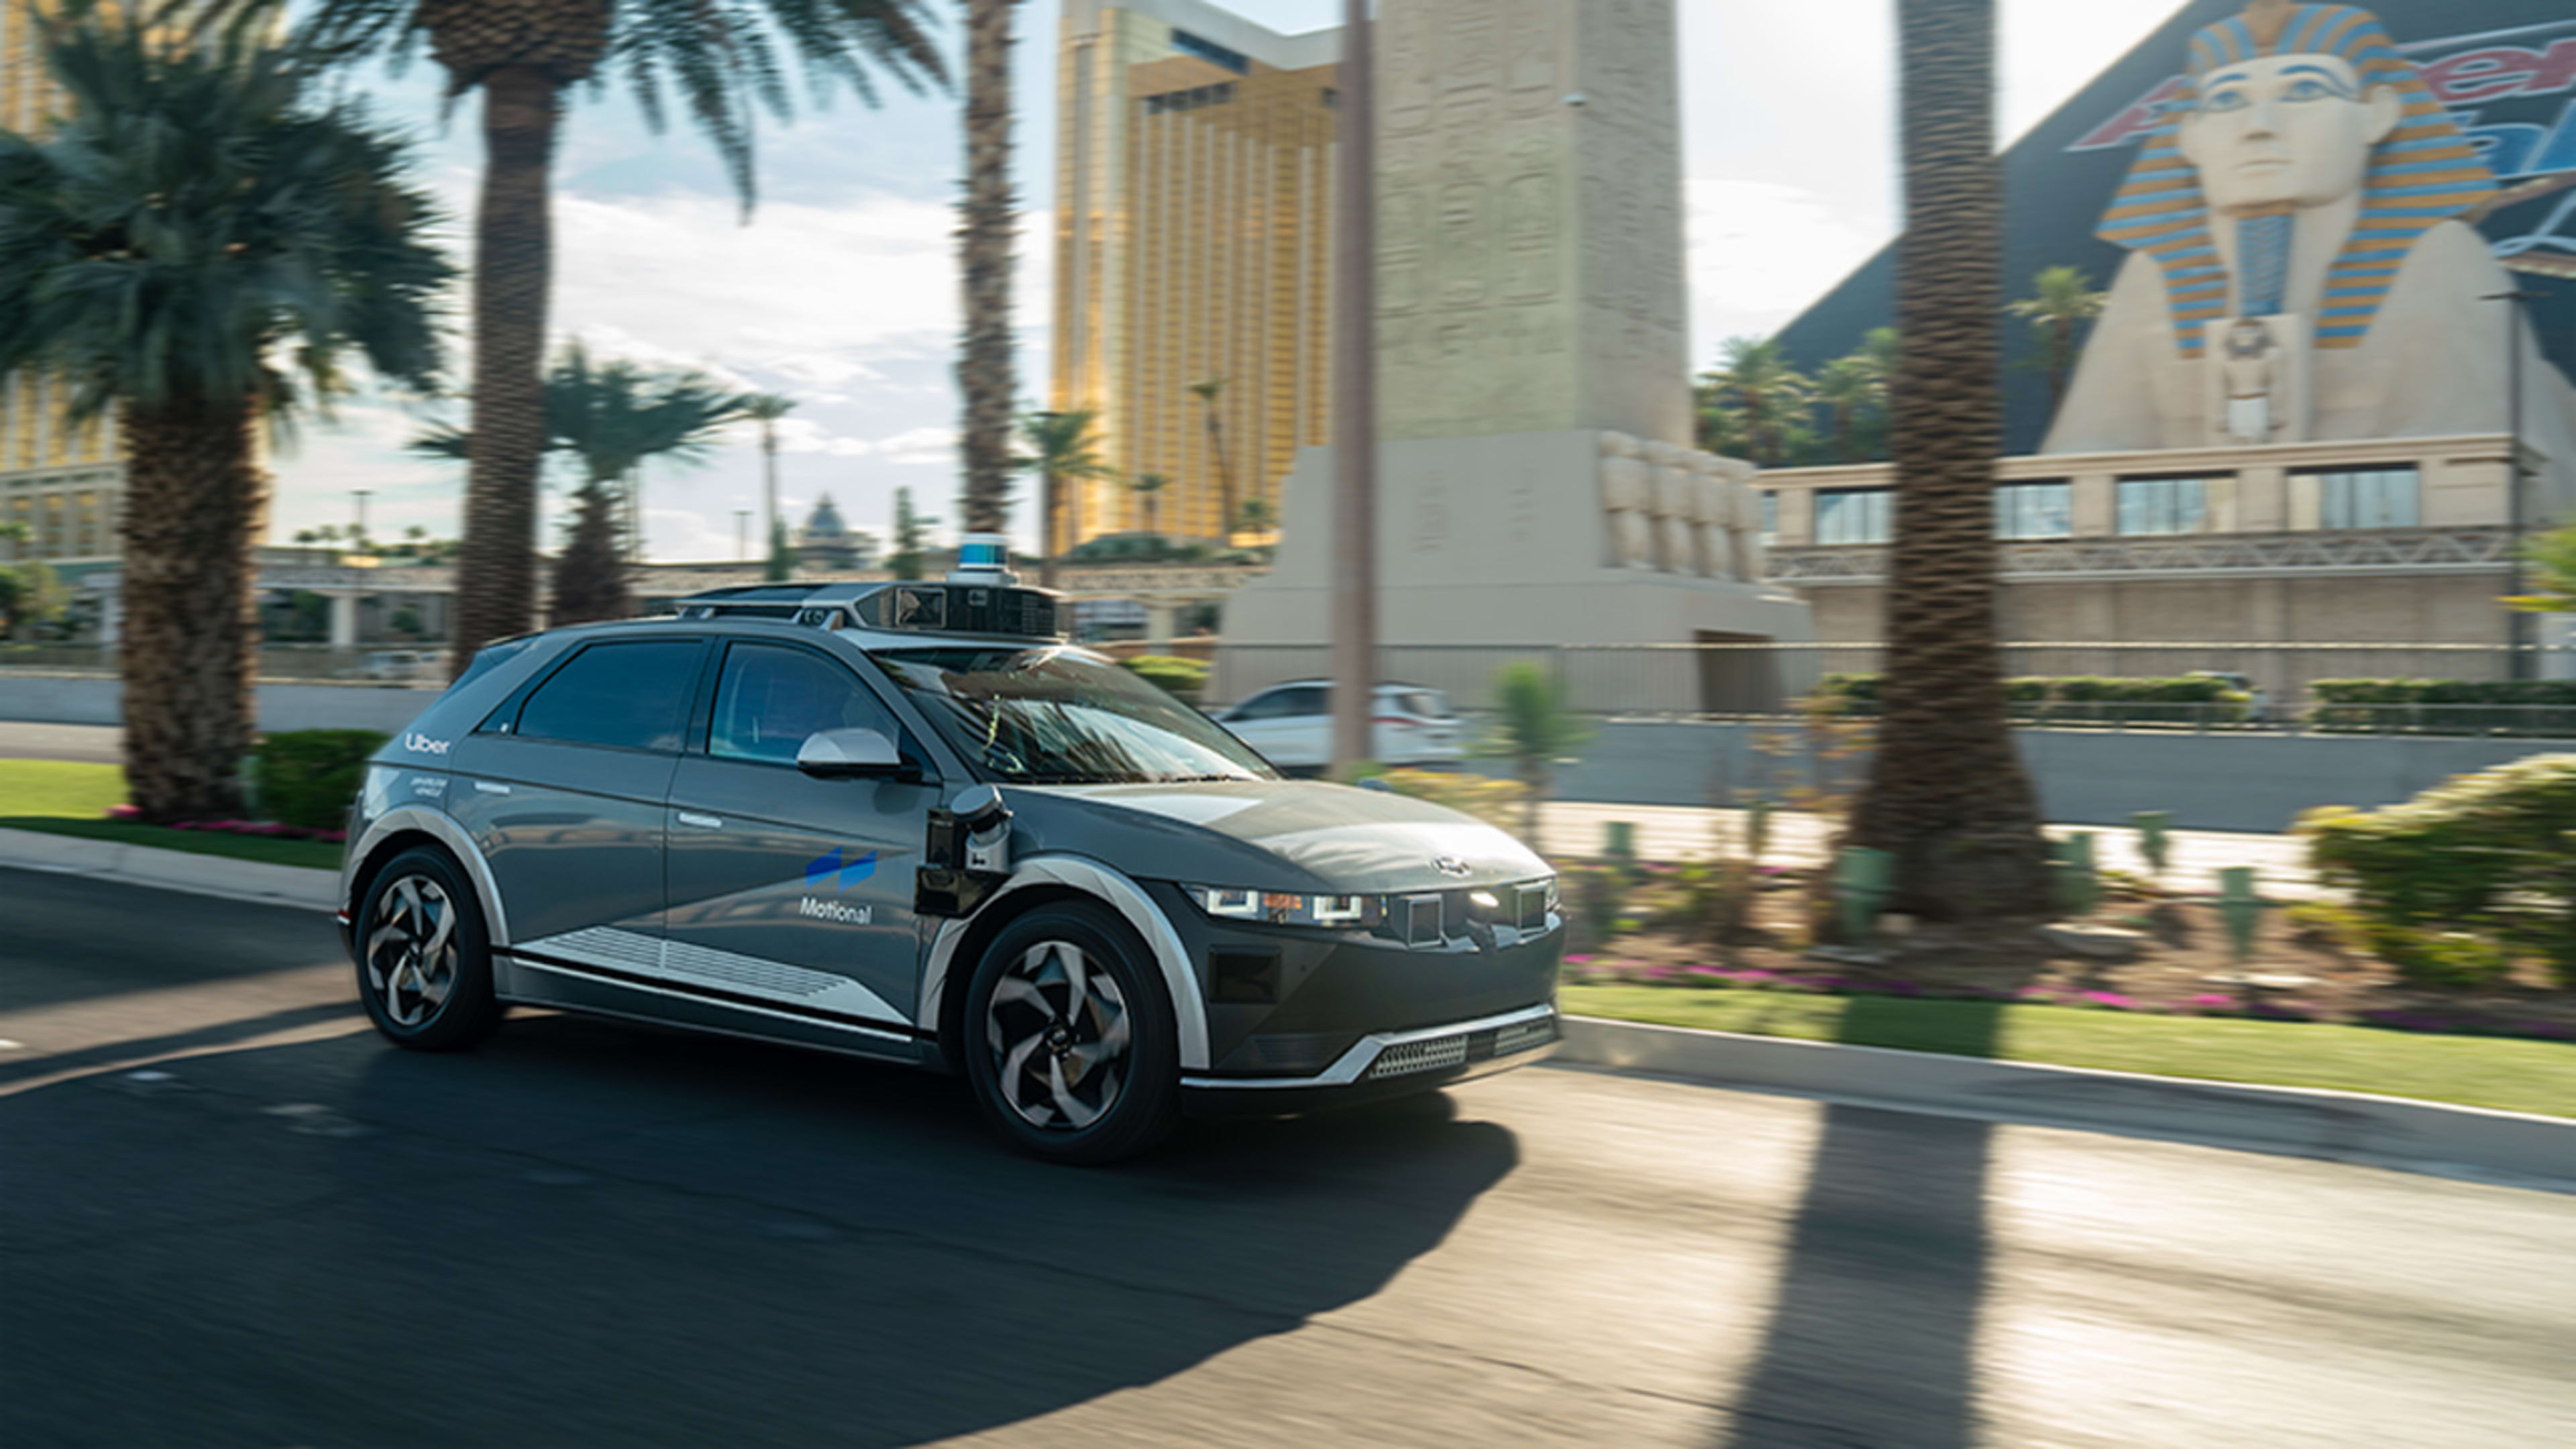 Uber and Motional launch self-driving rides in Las Vegas, with plans to expand to Los Angeles